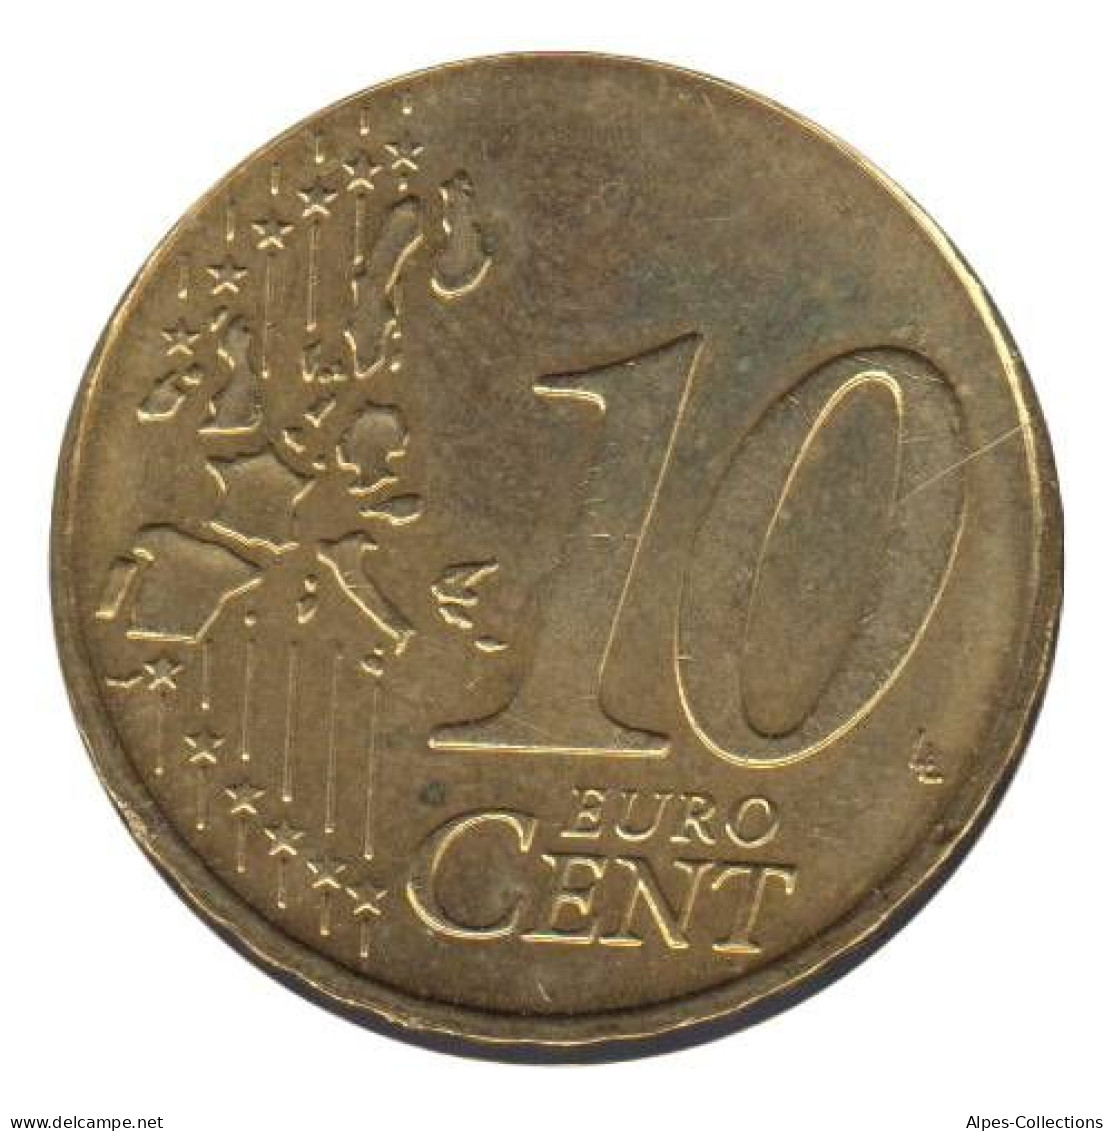 AL01002.1F - ALLEMAGNE - 10 Cents D'euro - 2002 F - Germany